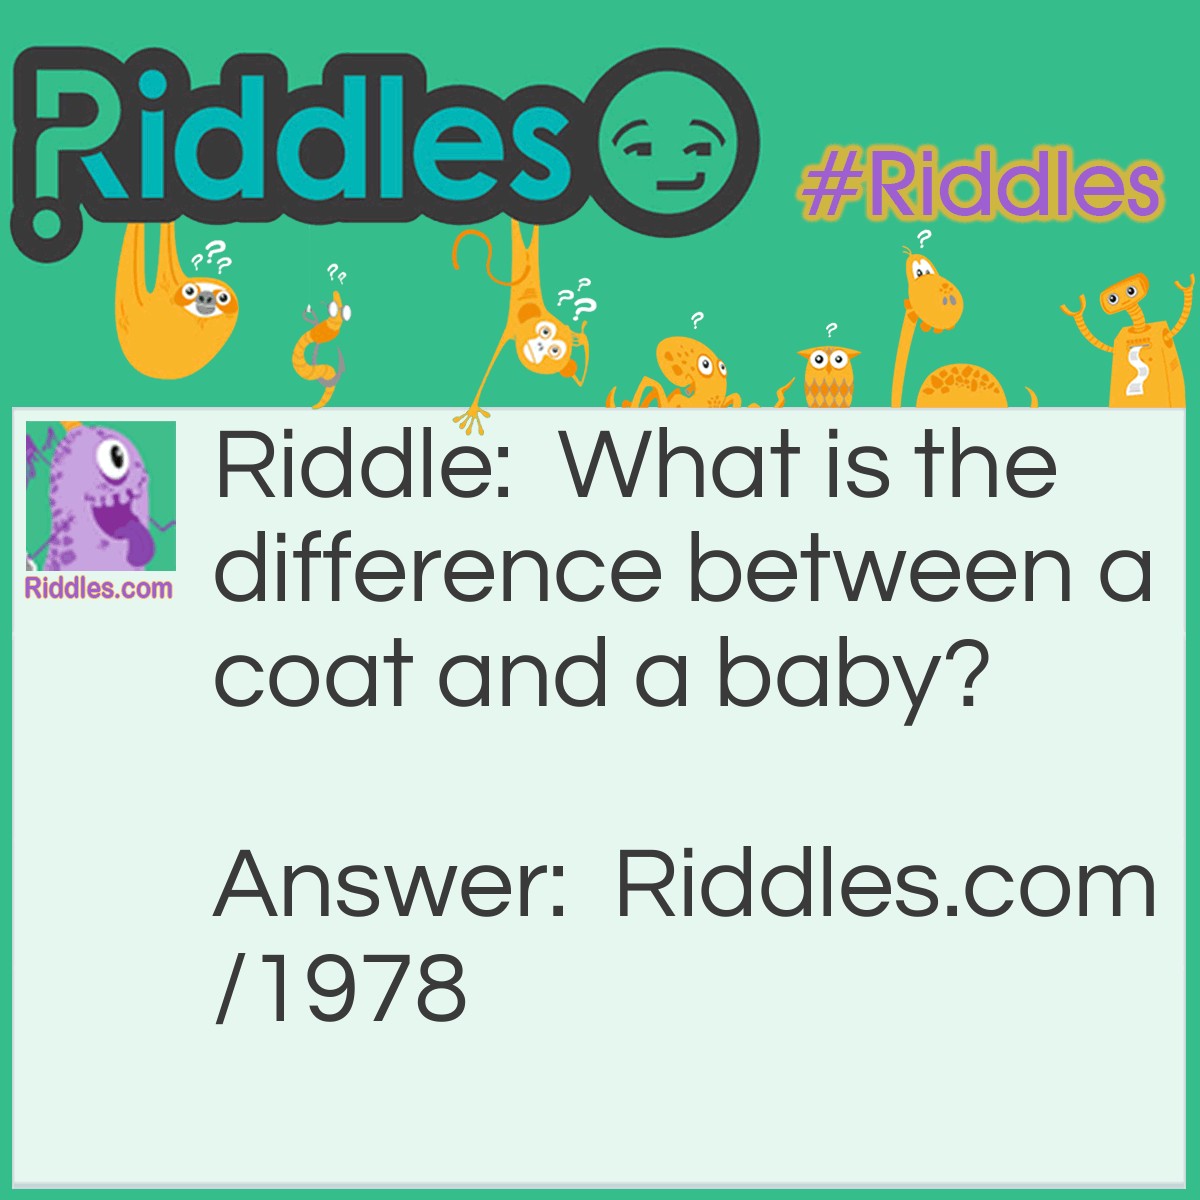 Riddle: What is the difference between a coat and a baby? Answer: The one you wear, the other you were.